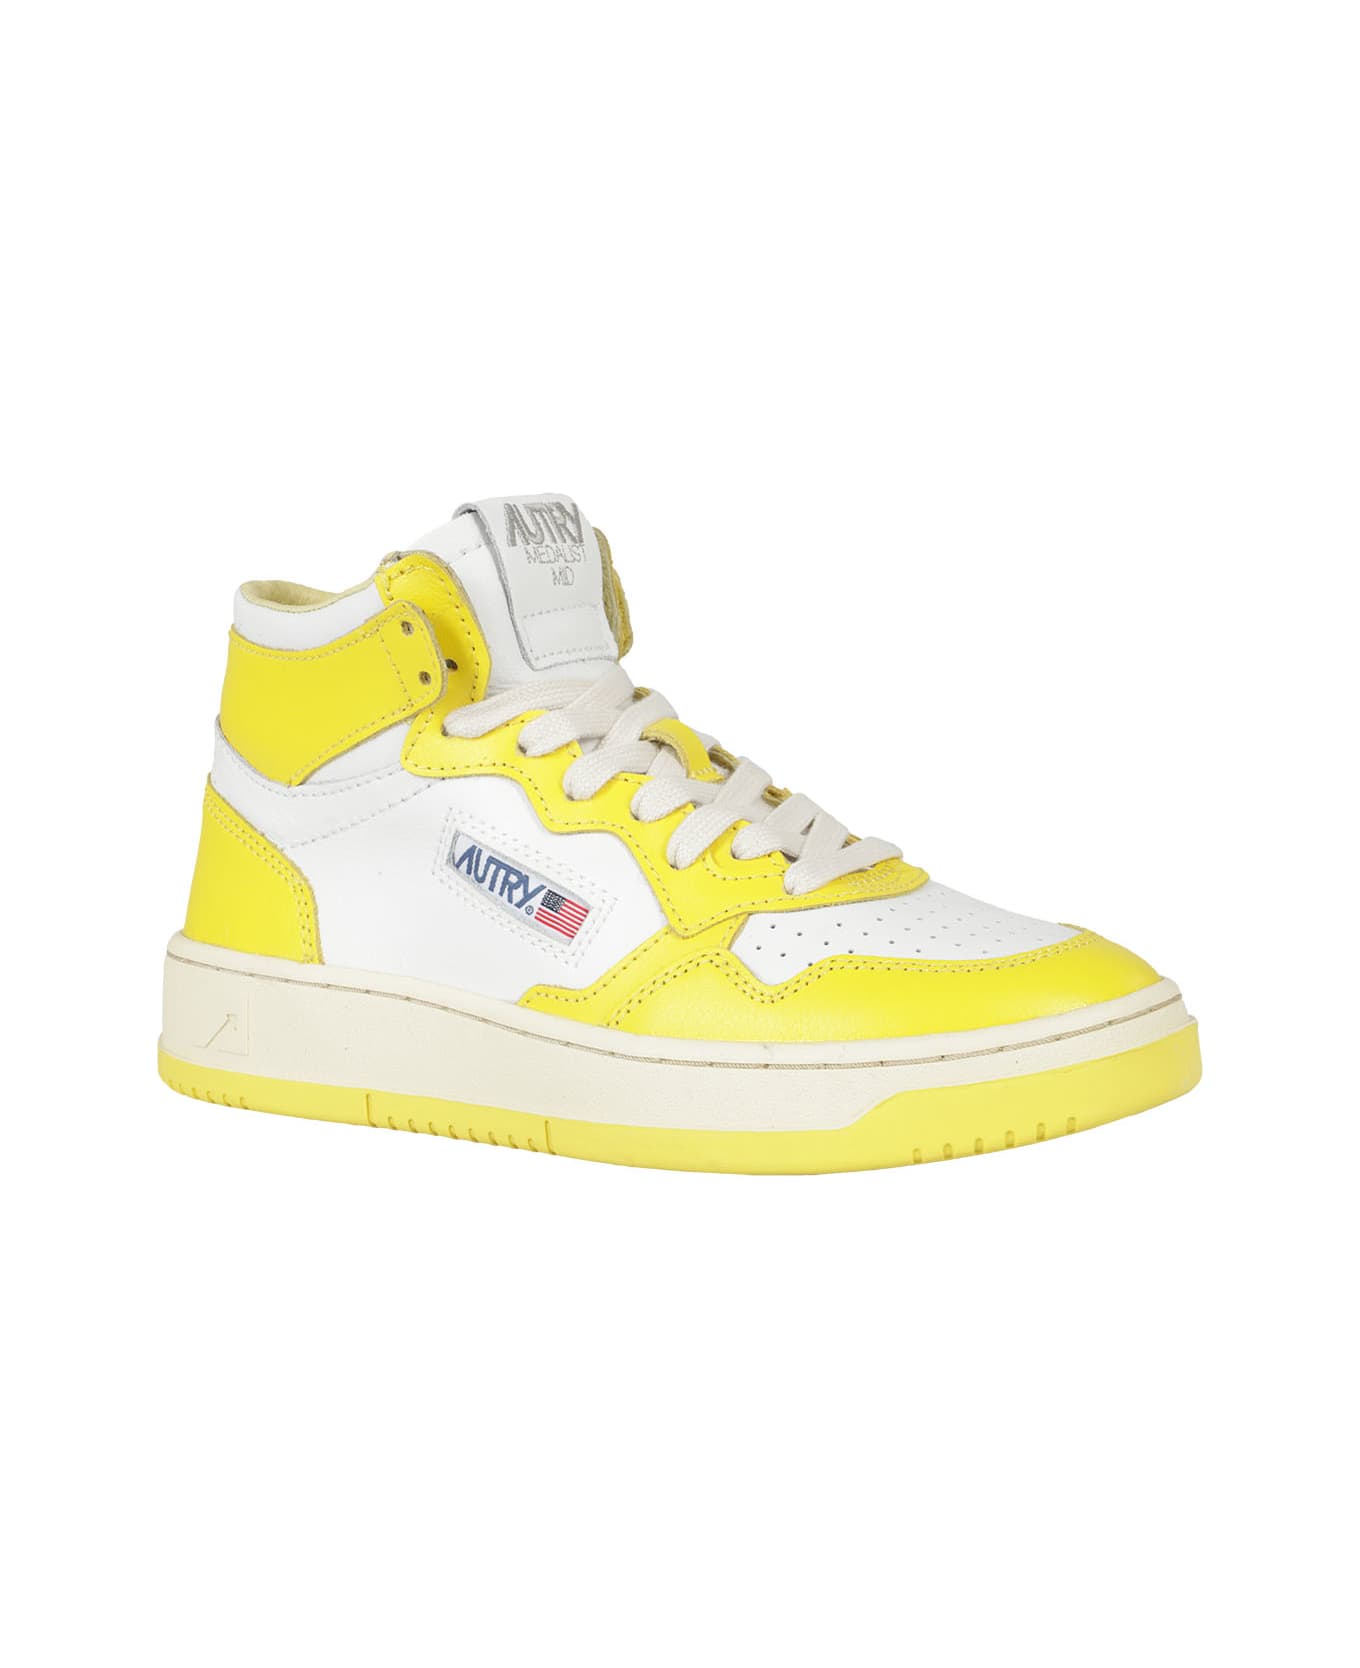 Autry Sneakers - Leat Yellow